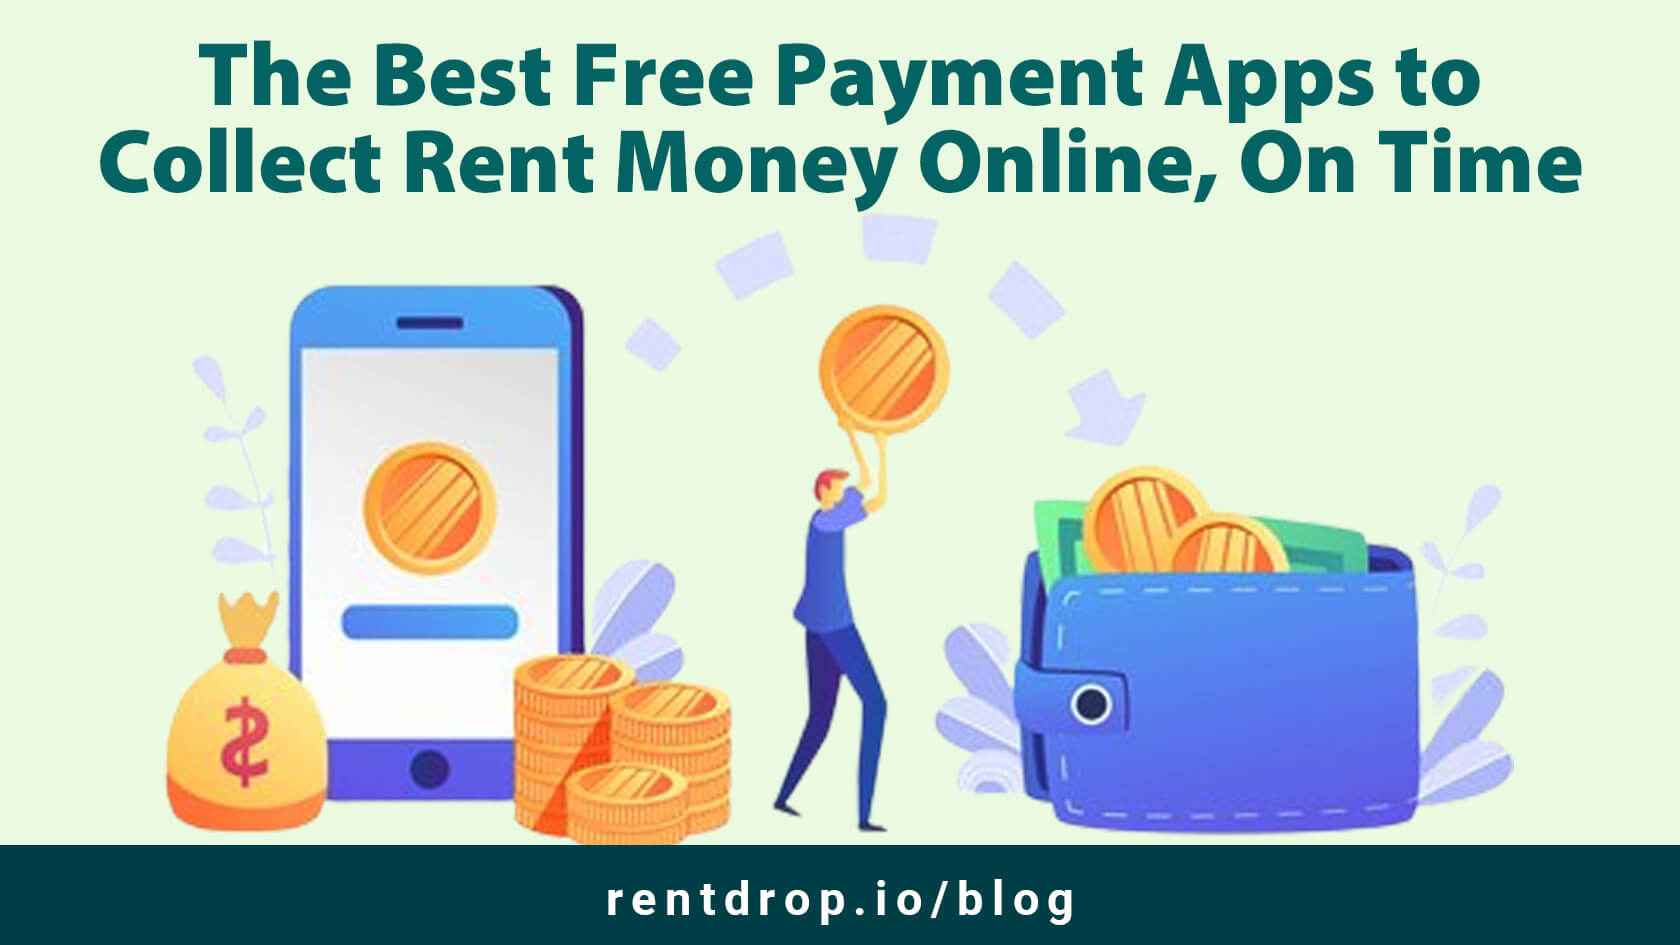 image of The Best Free Payment Apps to Collect Rent Money Online, On Time